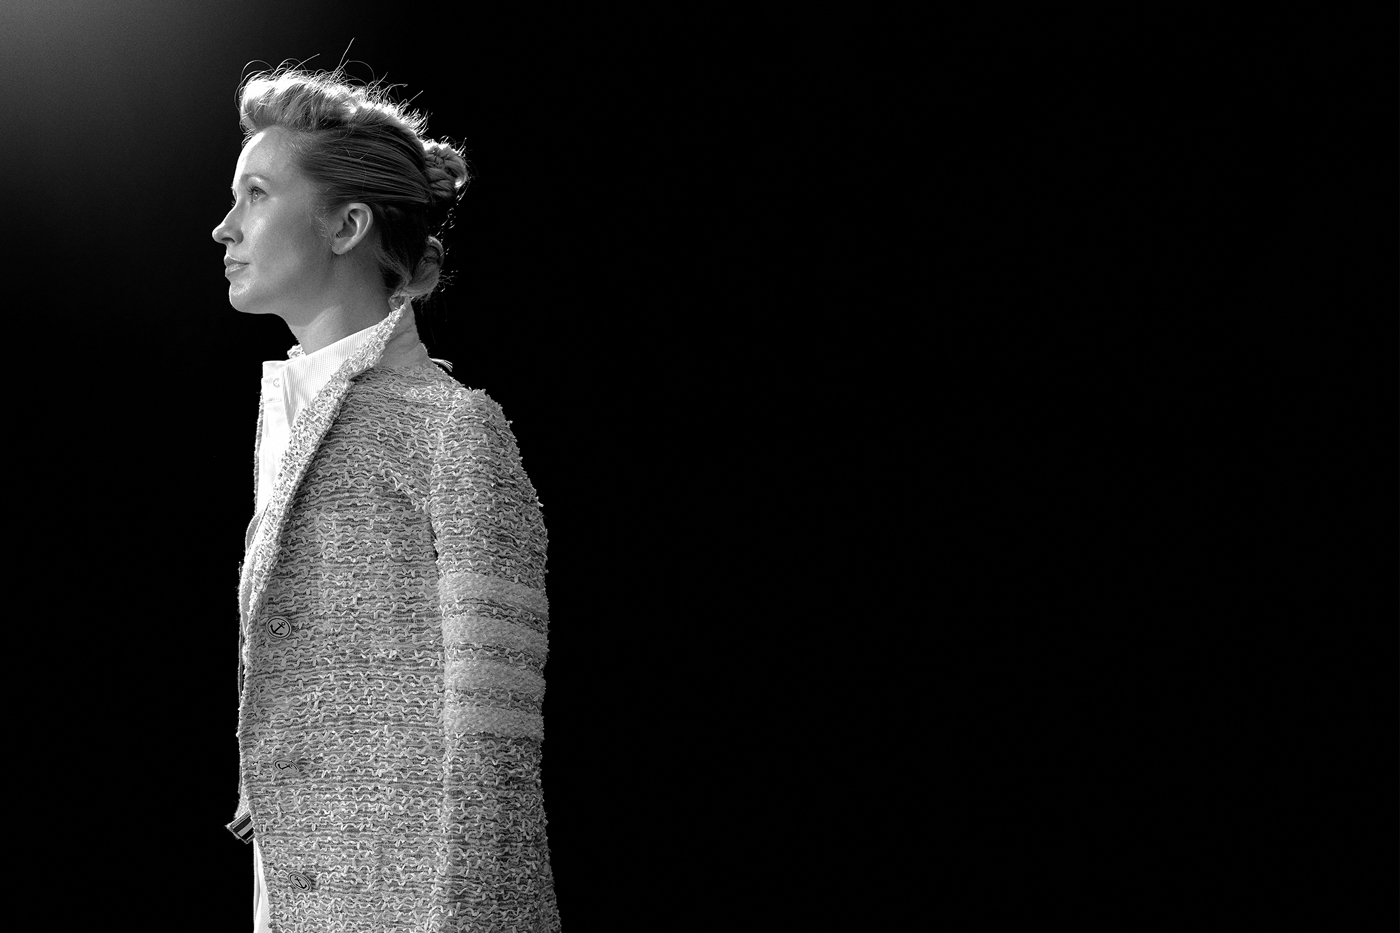 All clothing by Thom Browne.